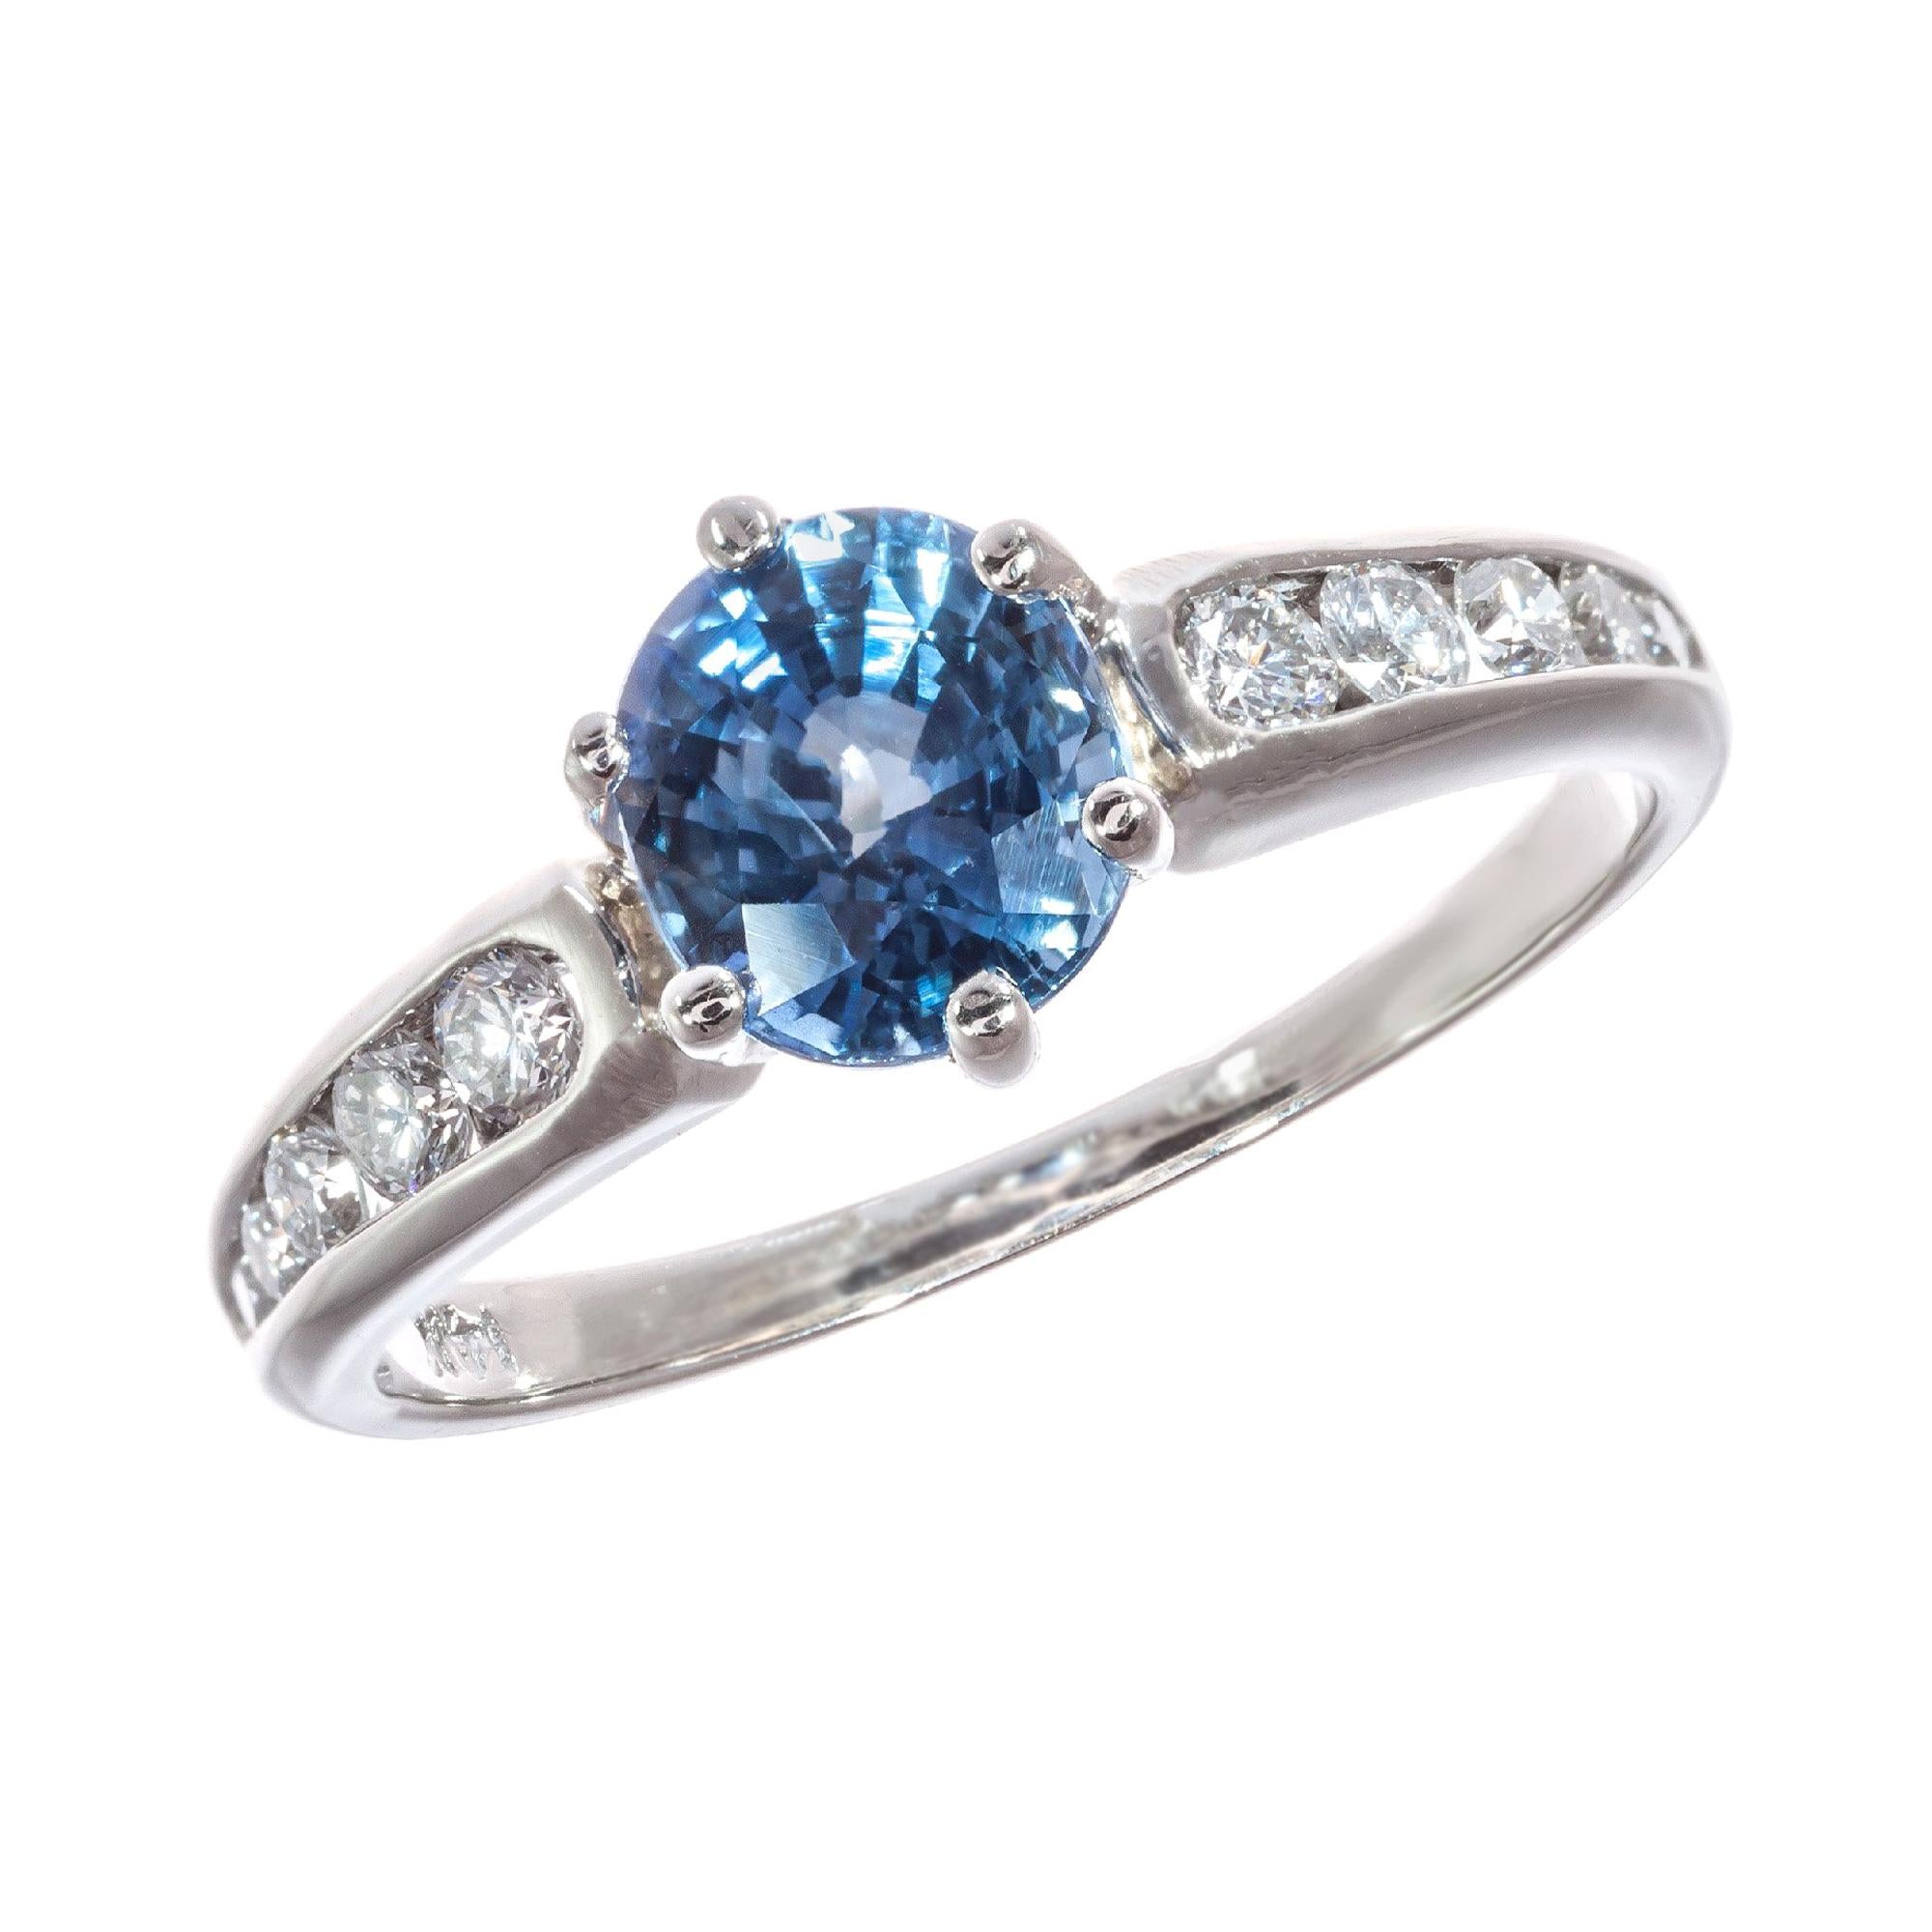 1.54 Carat Sapphire Diamond White Gold Solitaire Engagement Ring